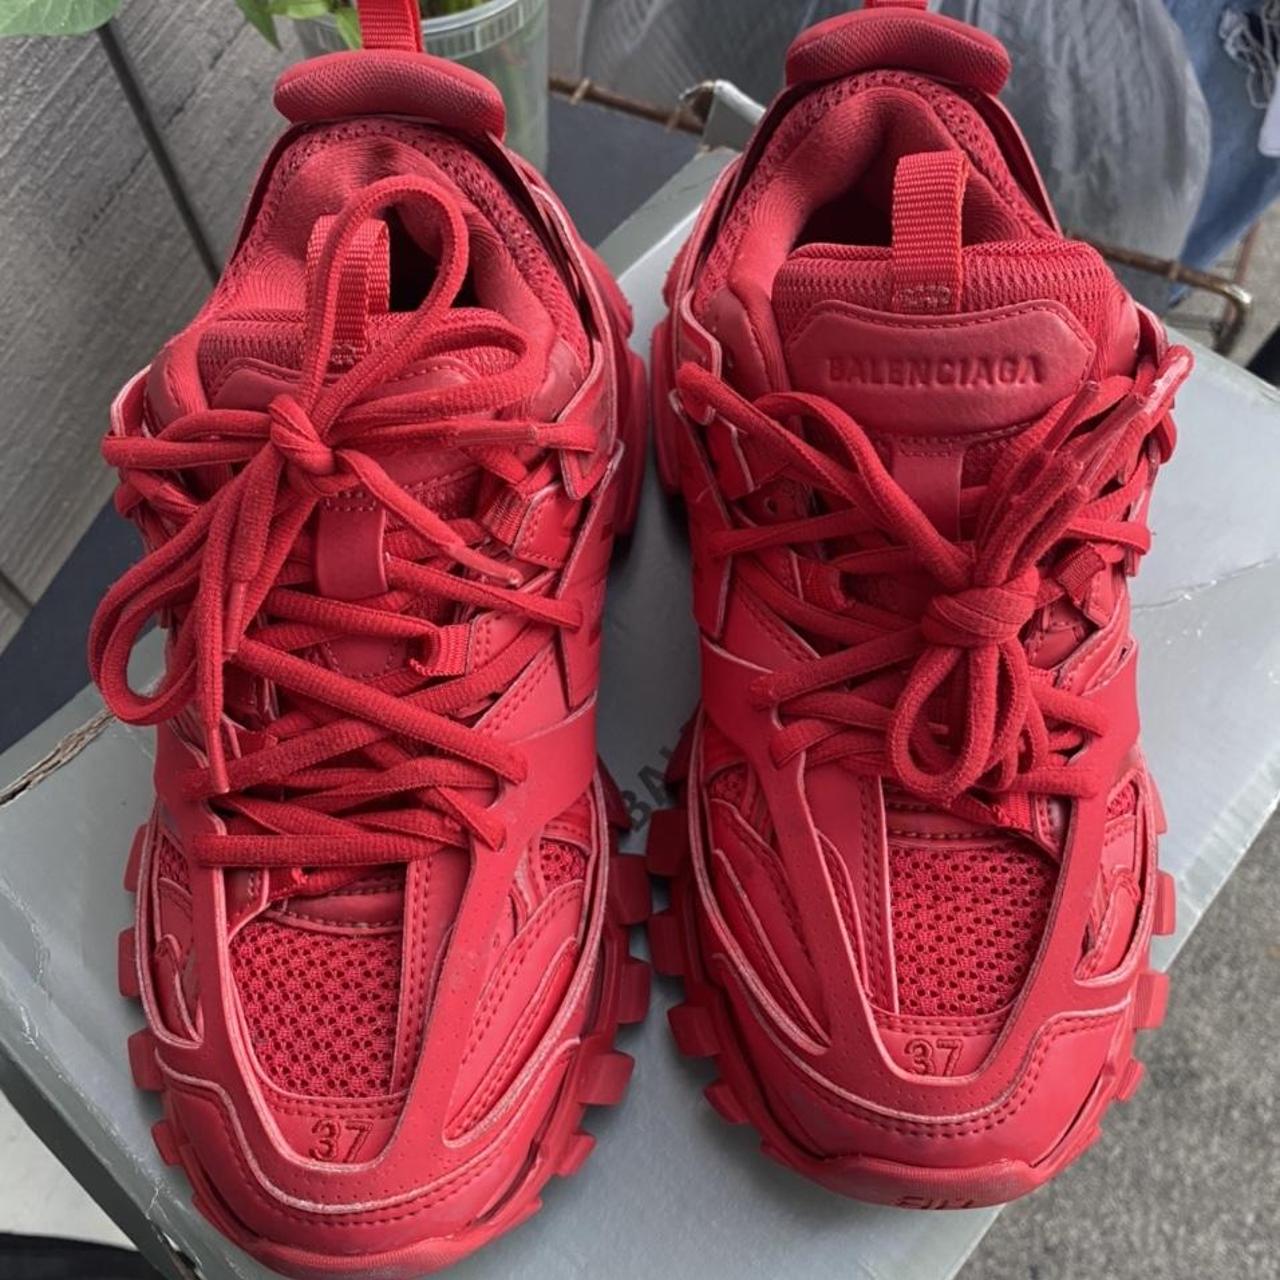 Selling my red balenciaga Track low top sneakers